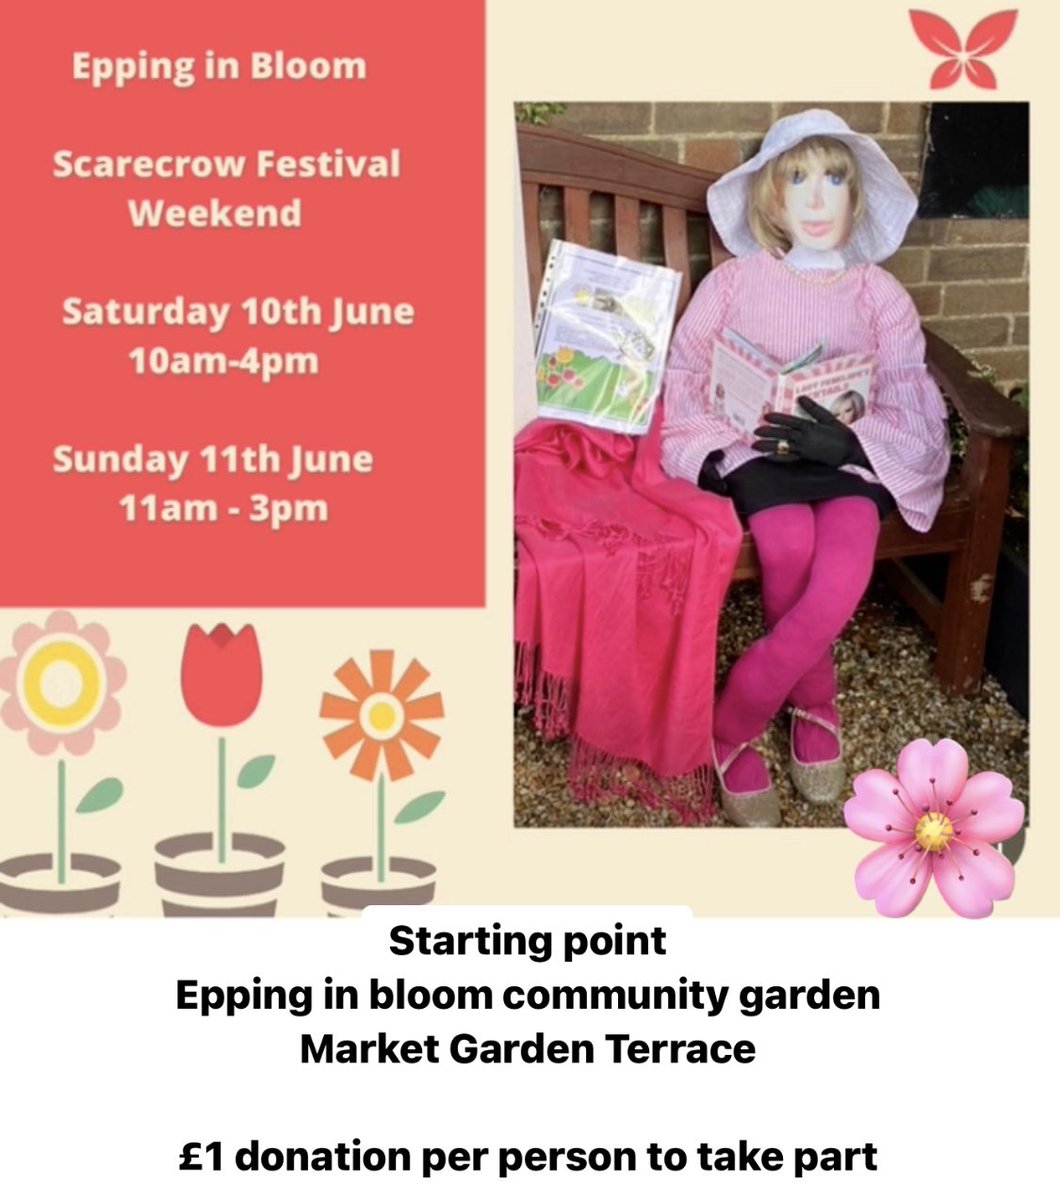 Today is the 1st day of the Epping in bloom festival.Come along and collect your maps the mayor will open the event at 10am 🌸🌱🐝#Epping #scarecrowfestival